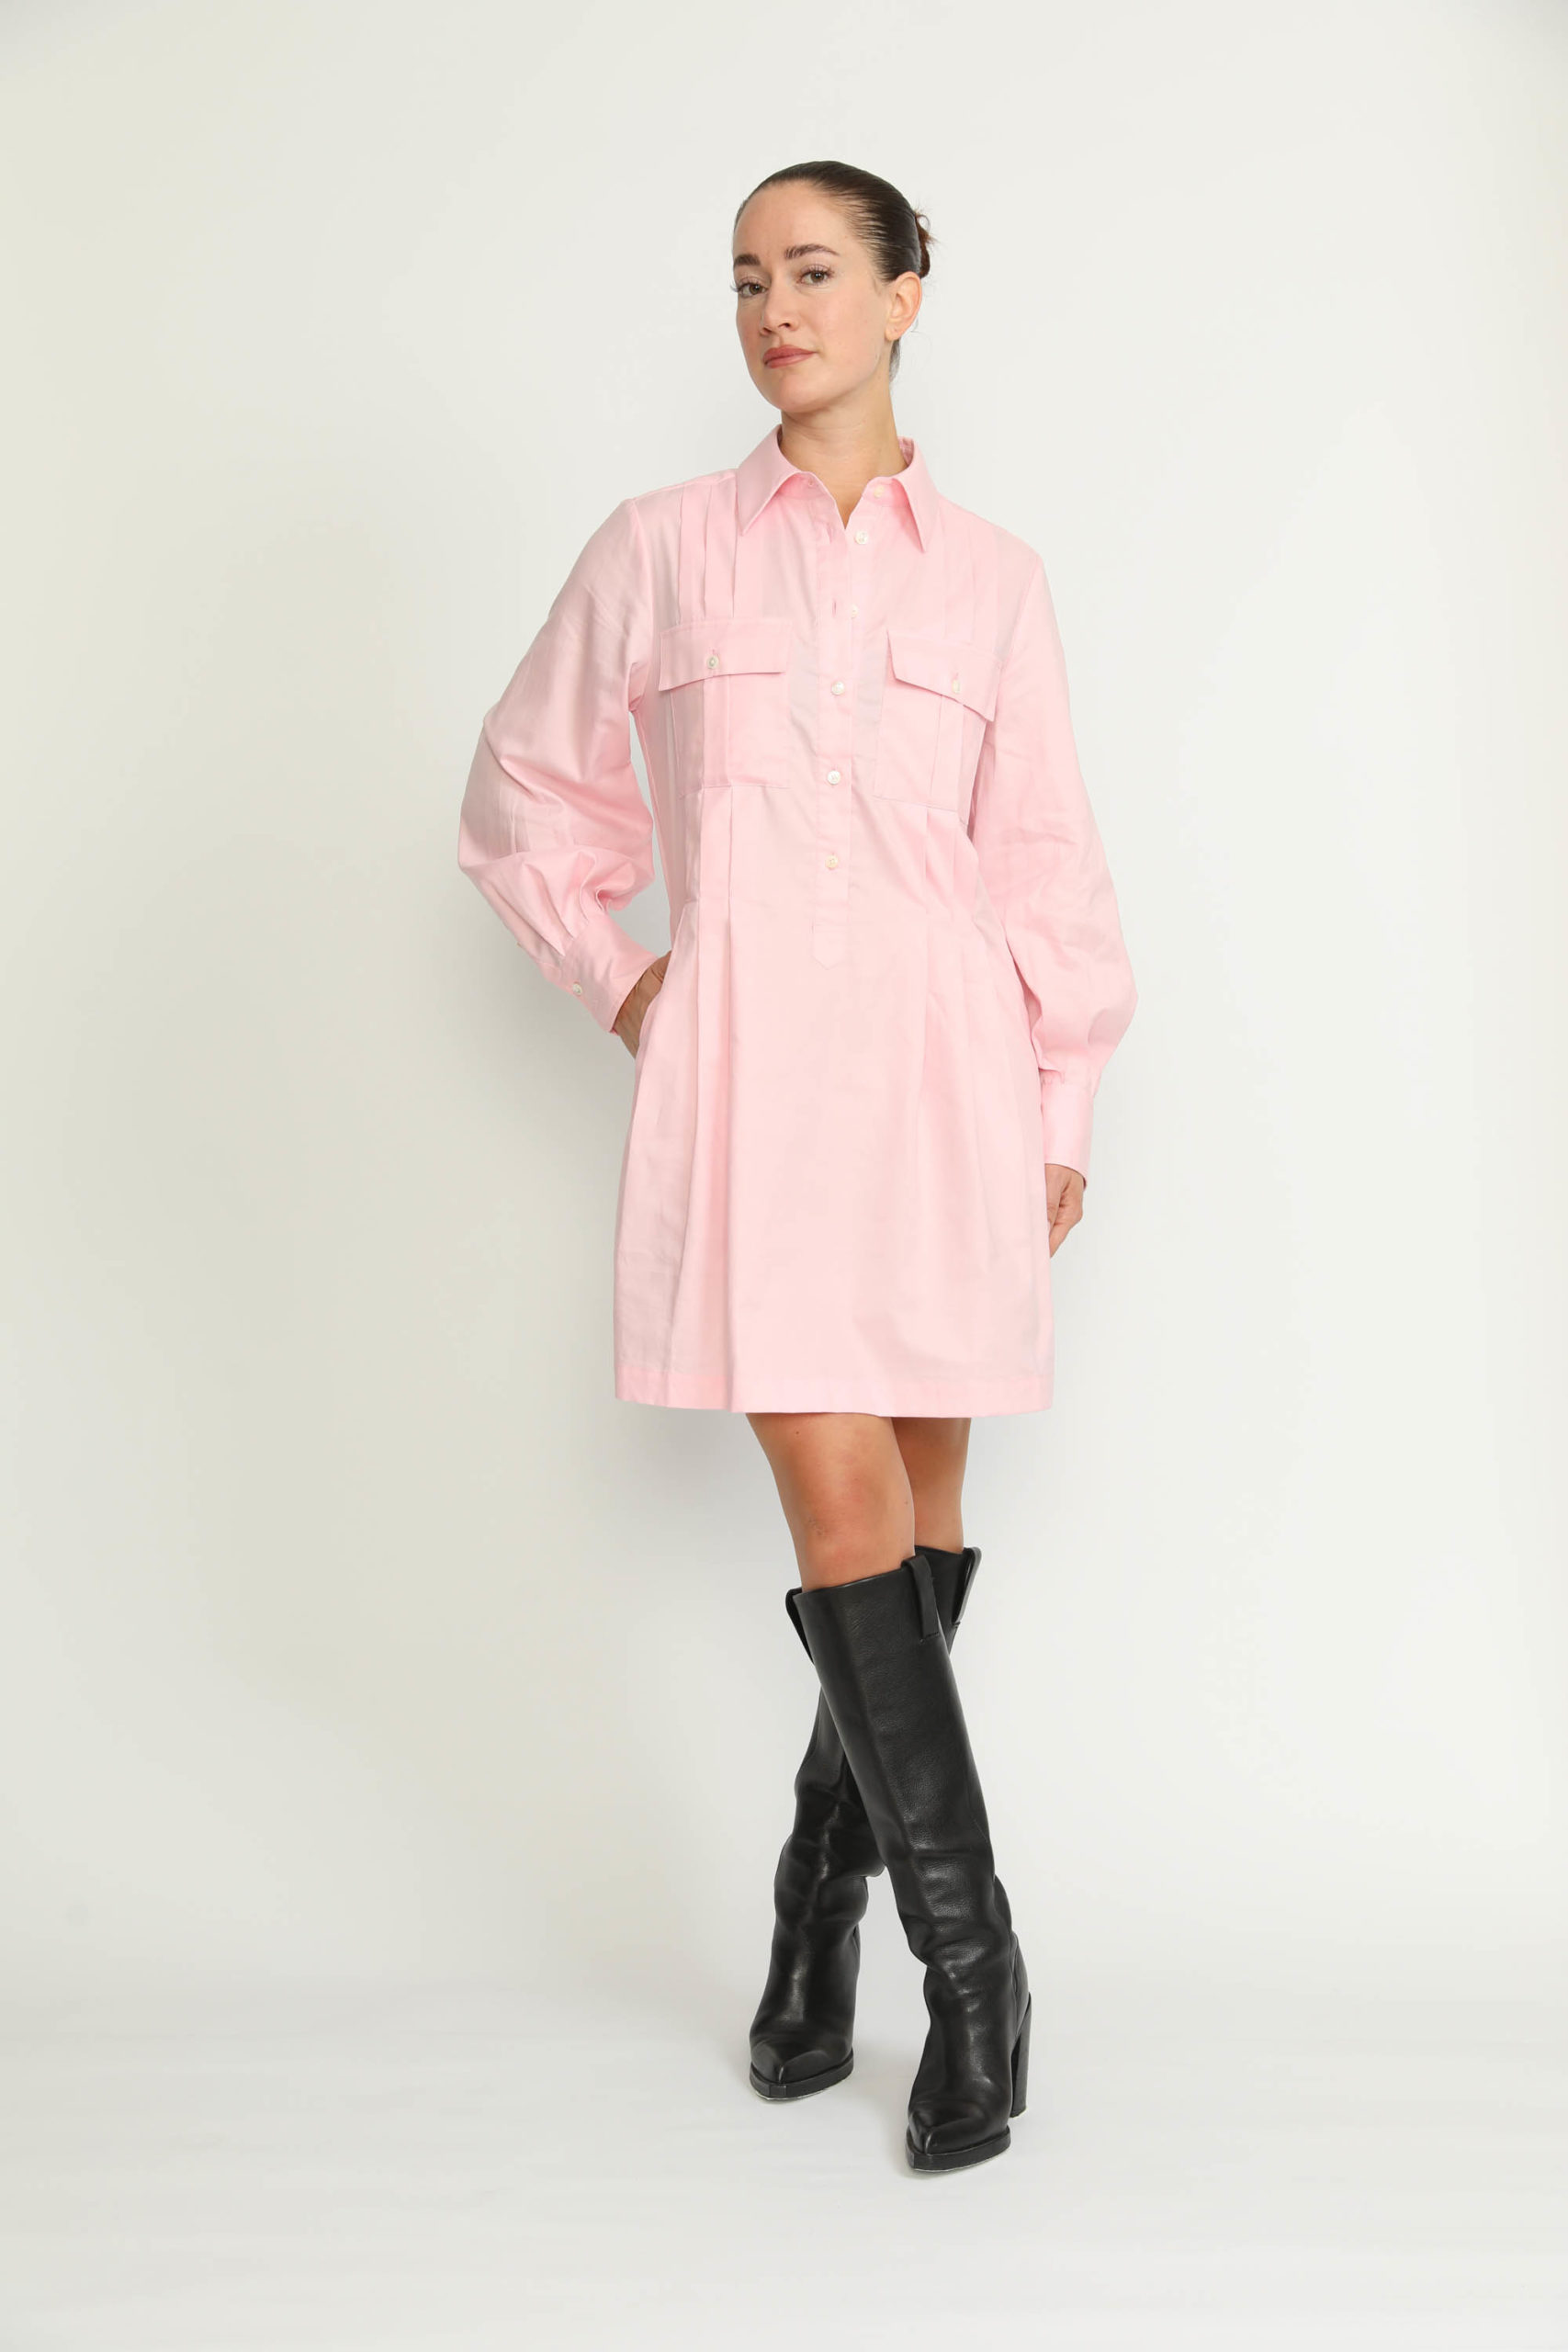 Pully Dress – Pully Short Shirt Dress in Pink Oxford